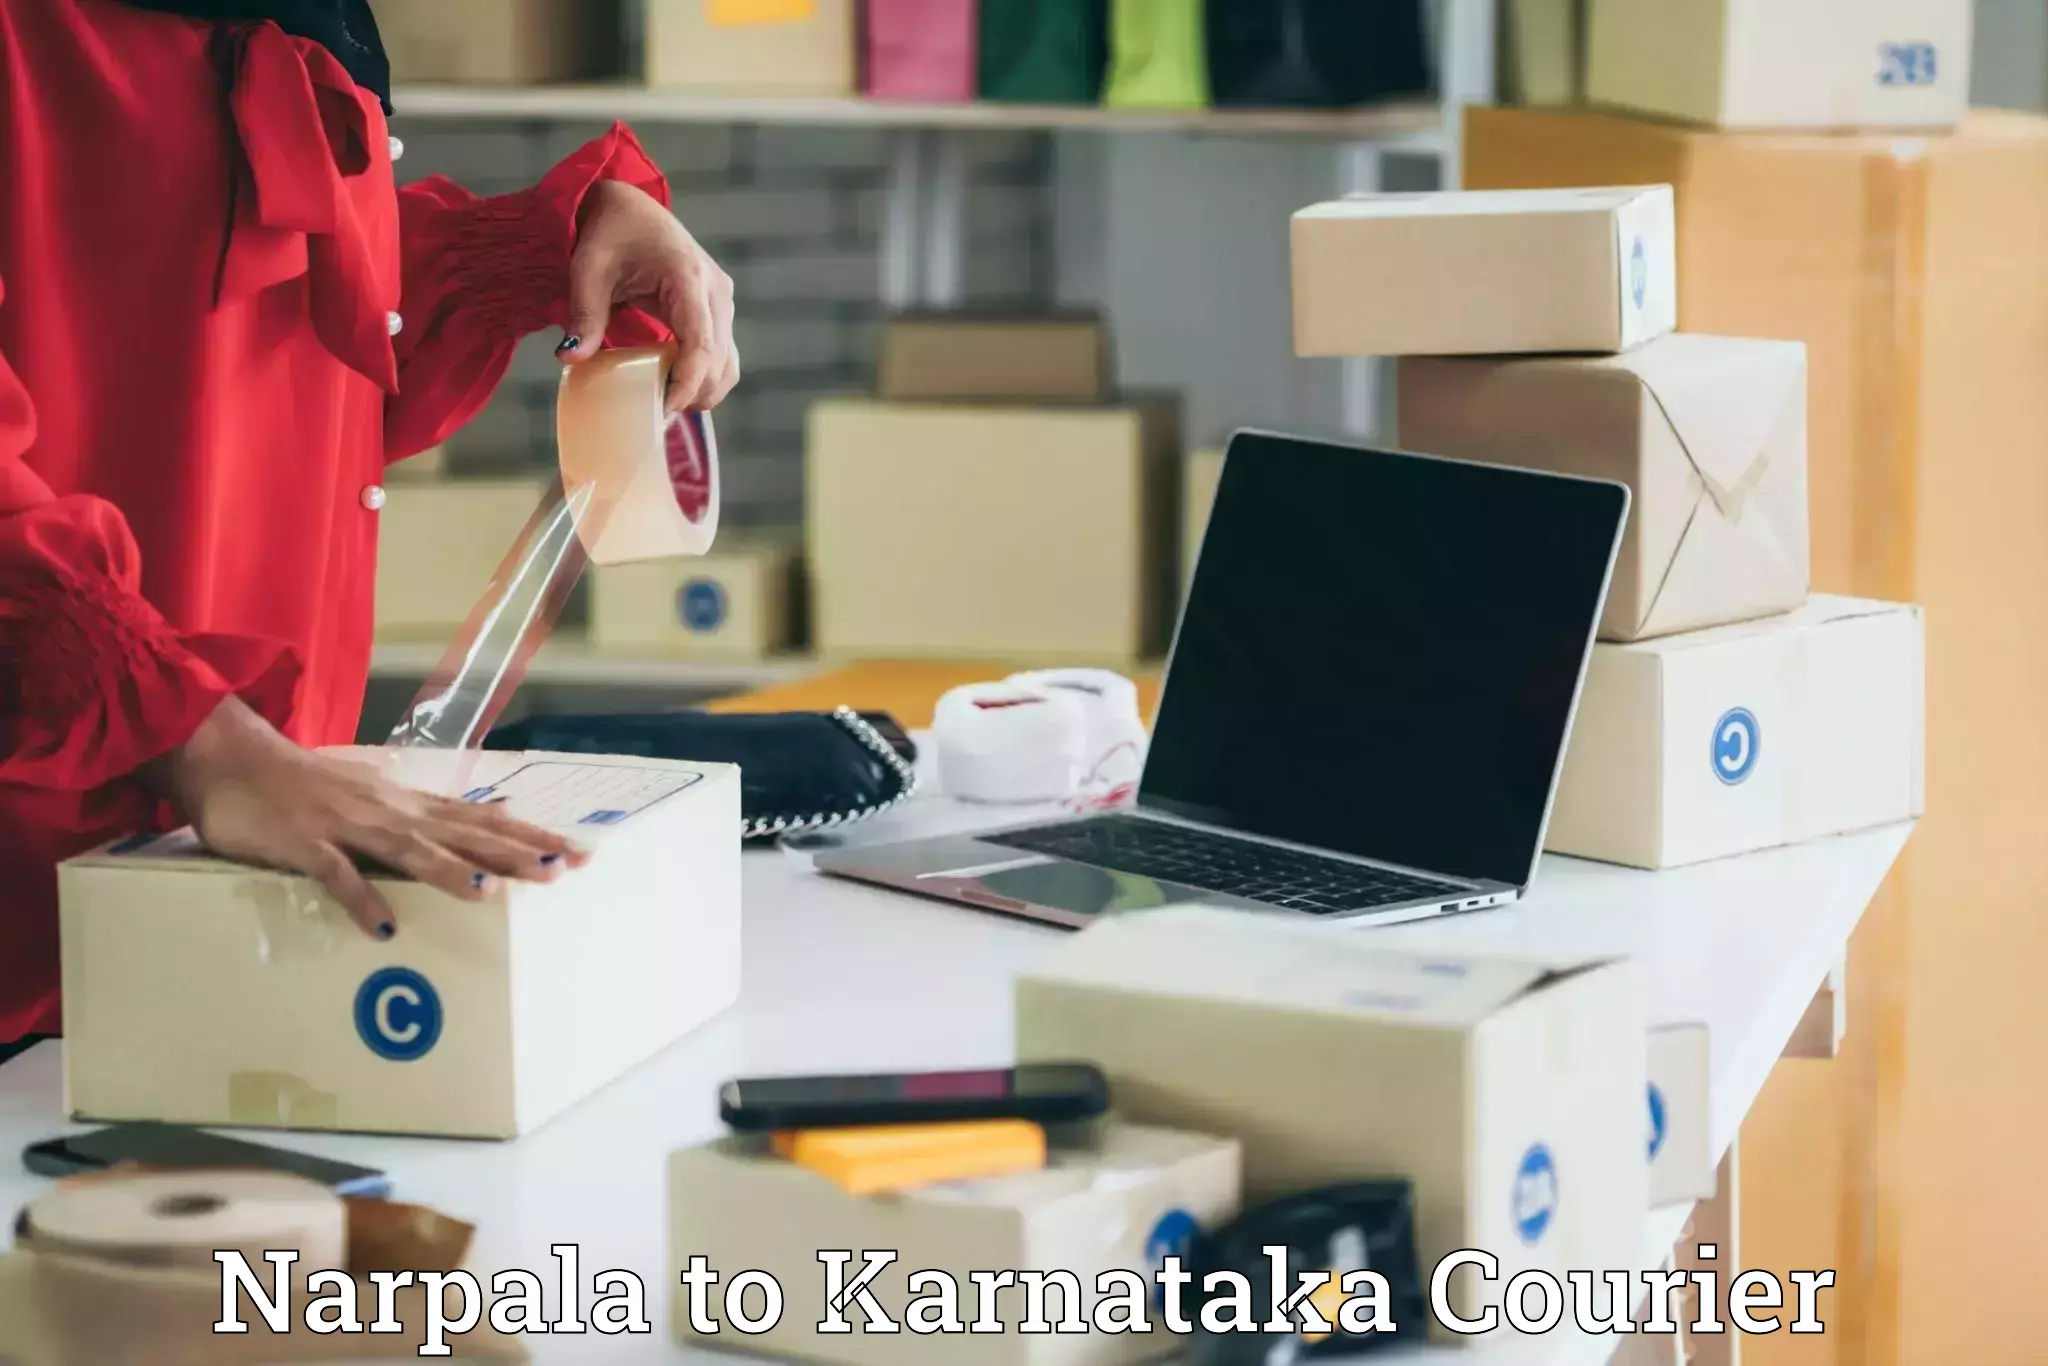 Courier dispatch services Narpala to Thirthahalli